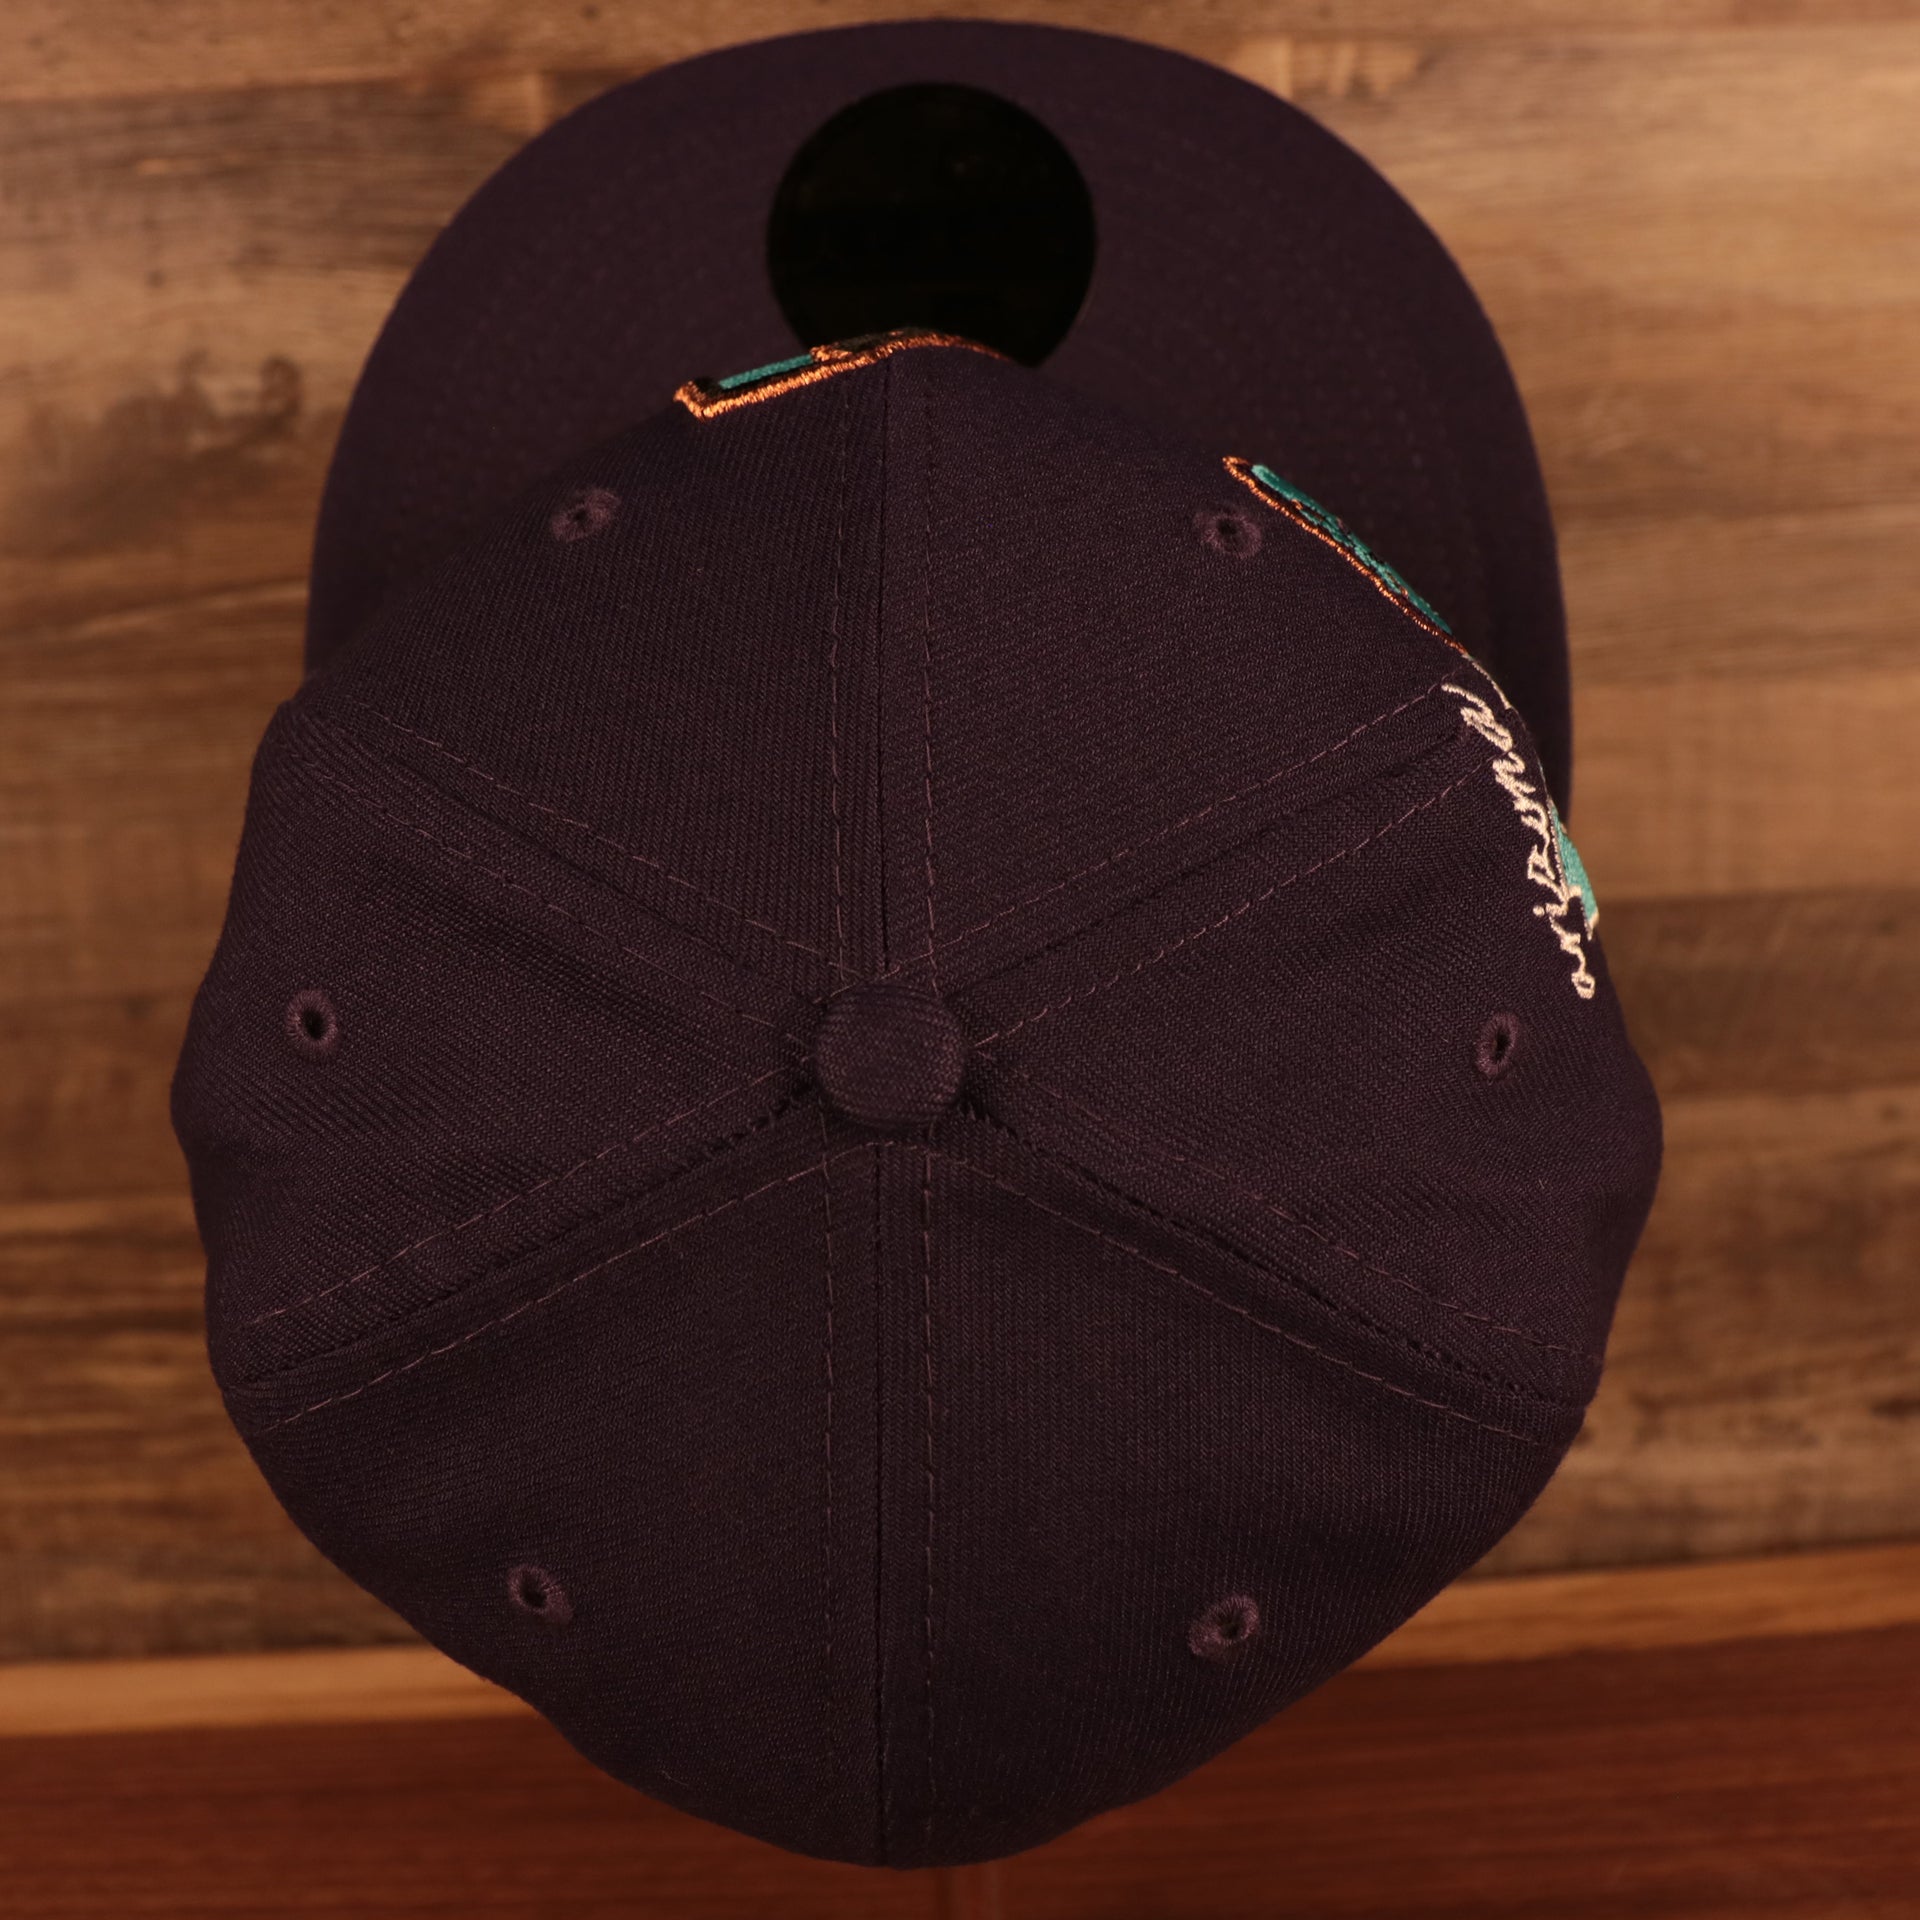 Top down view of the Arizona Diamondbacks "City Cluster" Side Patch Gray Bottom Purple 59Fifty Fitted Cap